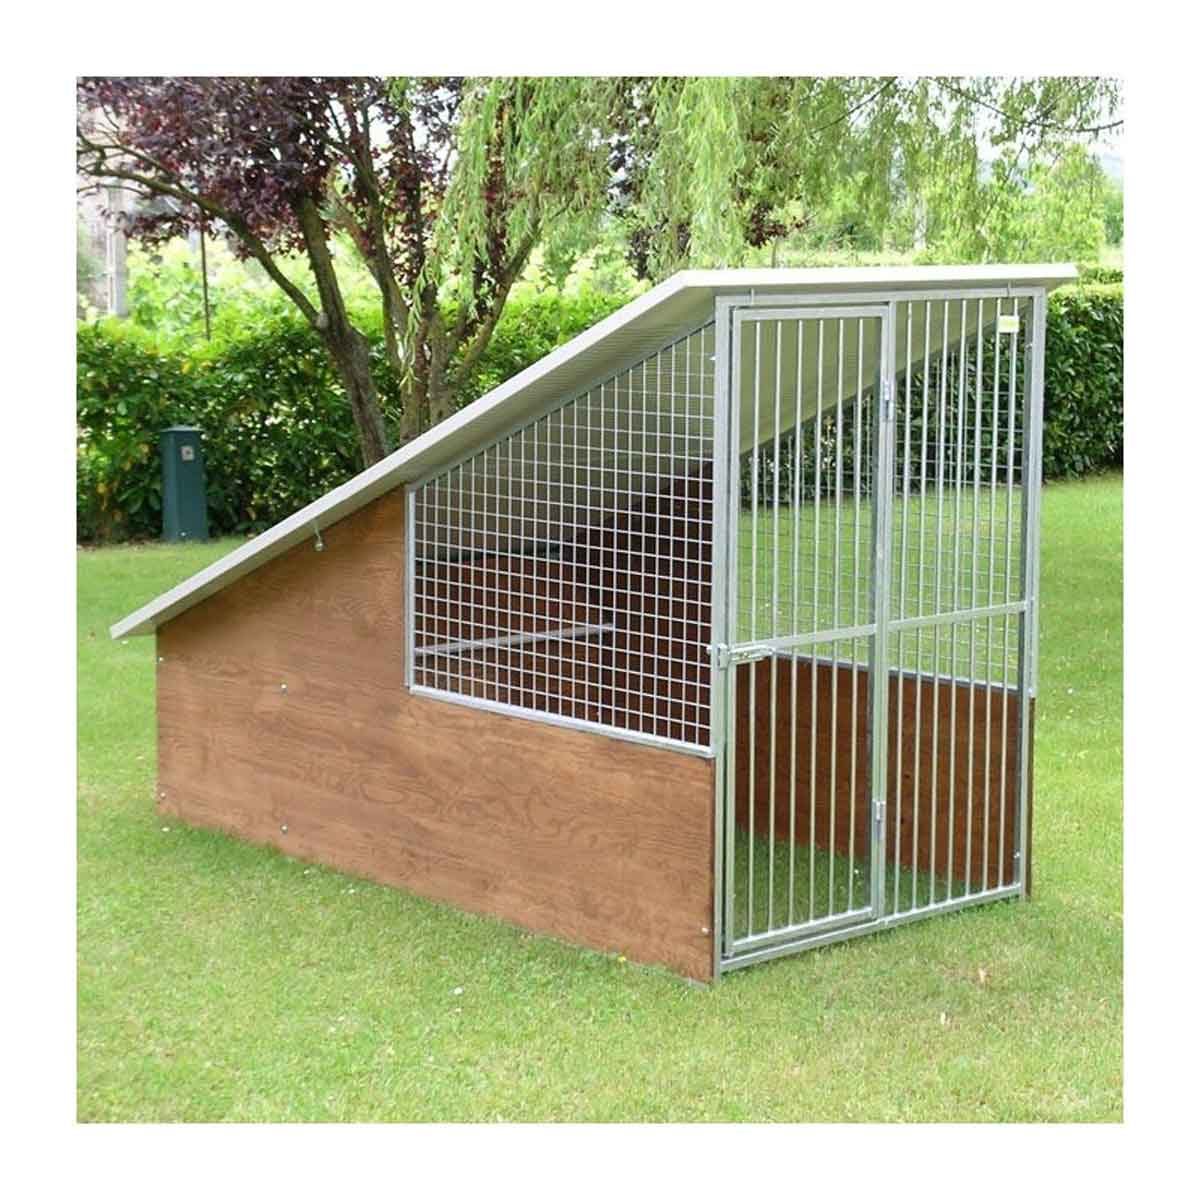 Kennel Fencing And Security